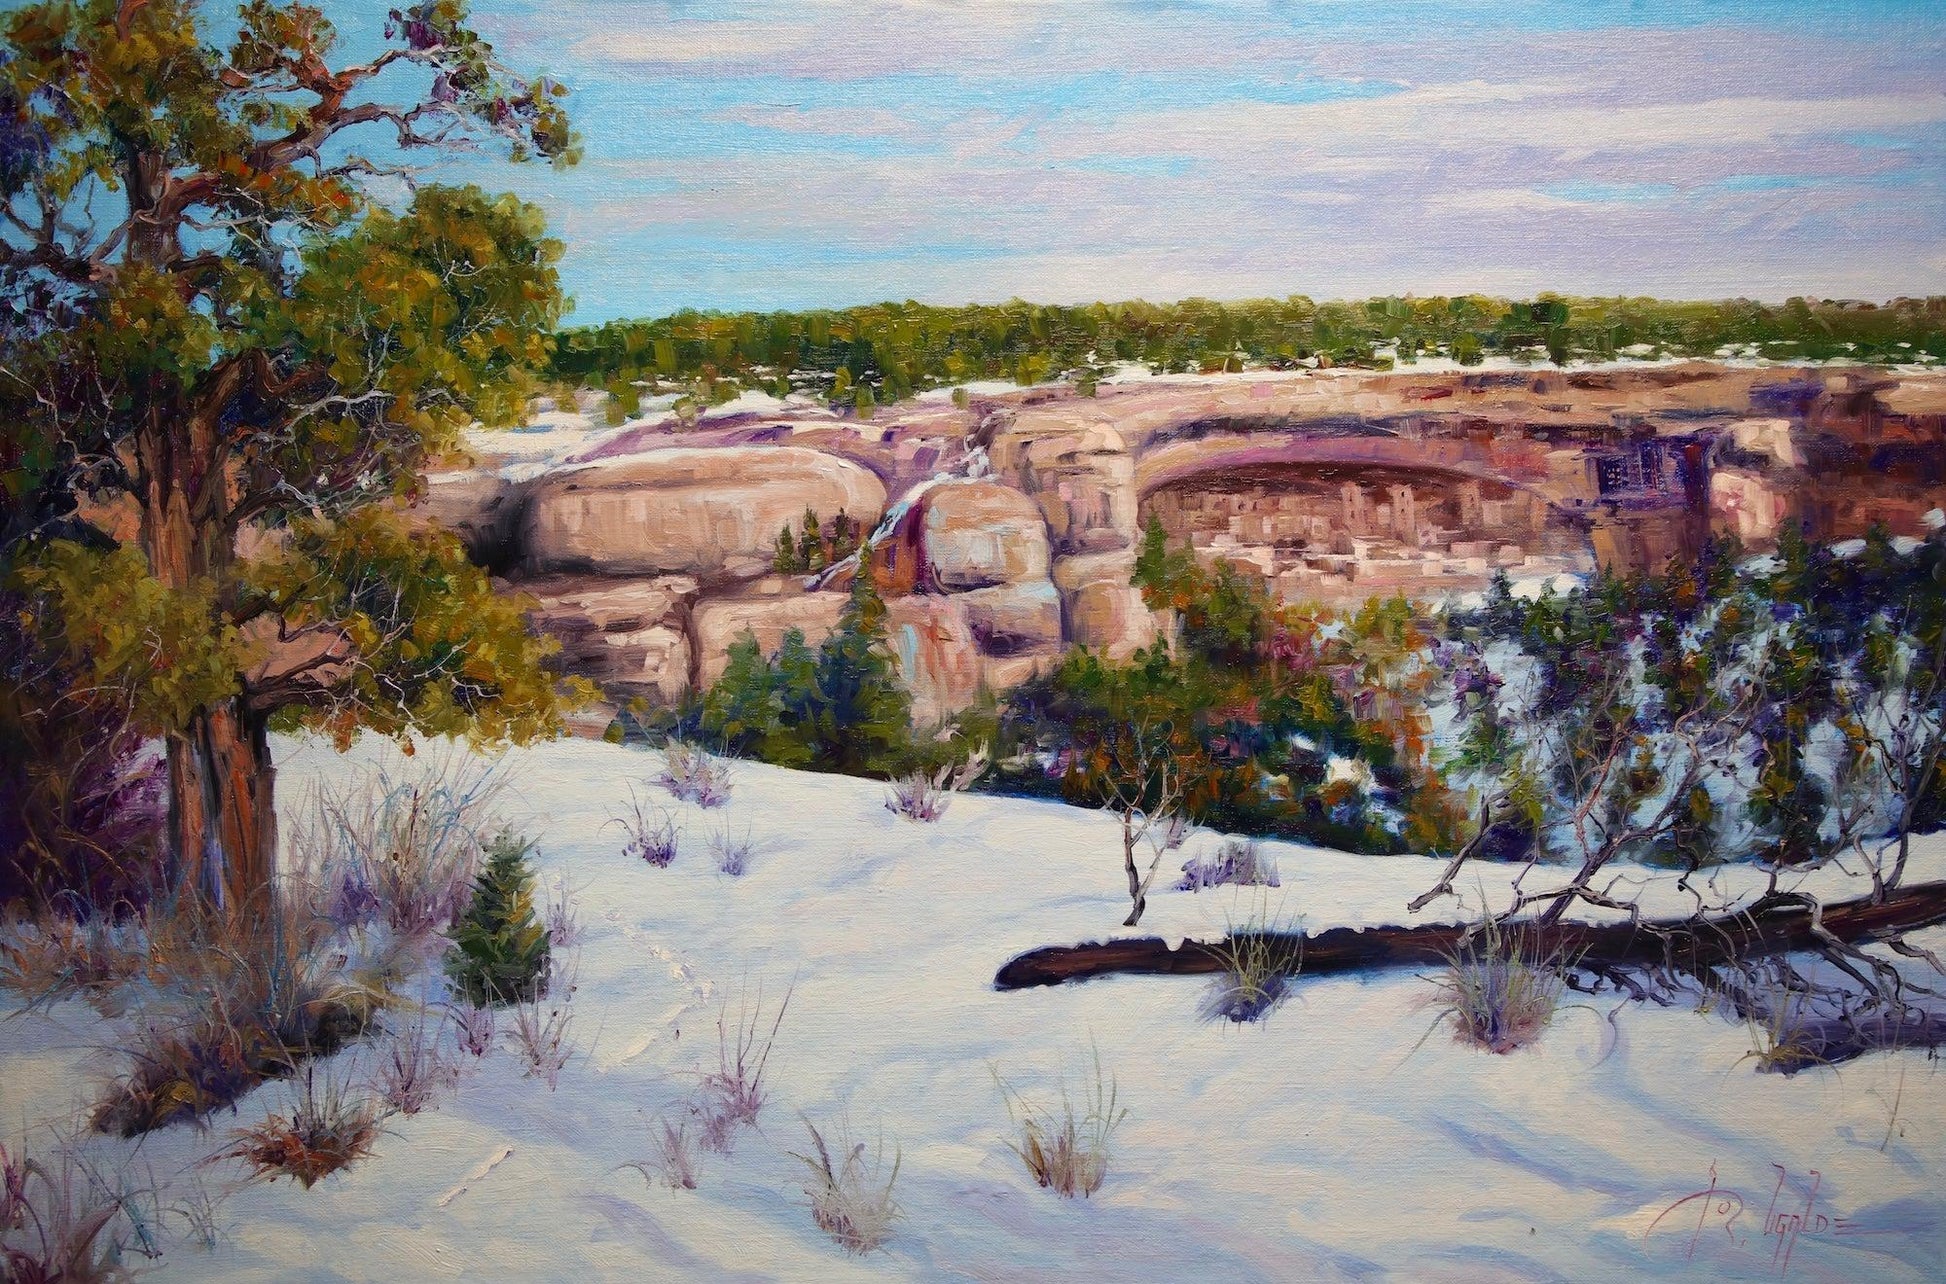 Cliff Palace-Painting-Roberto Ugalde-Sorrel Sky Gallery